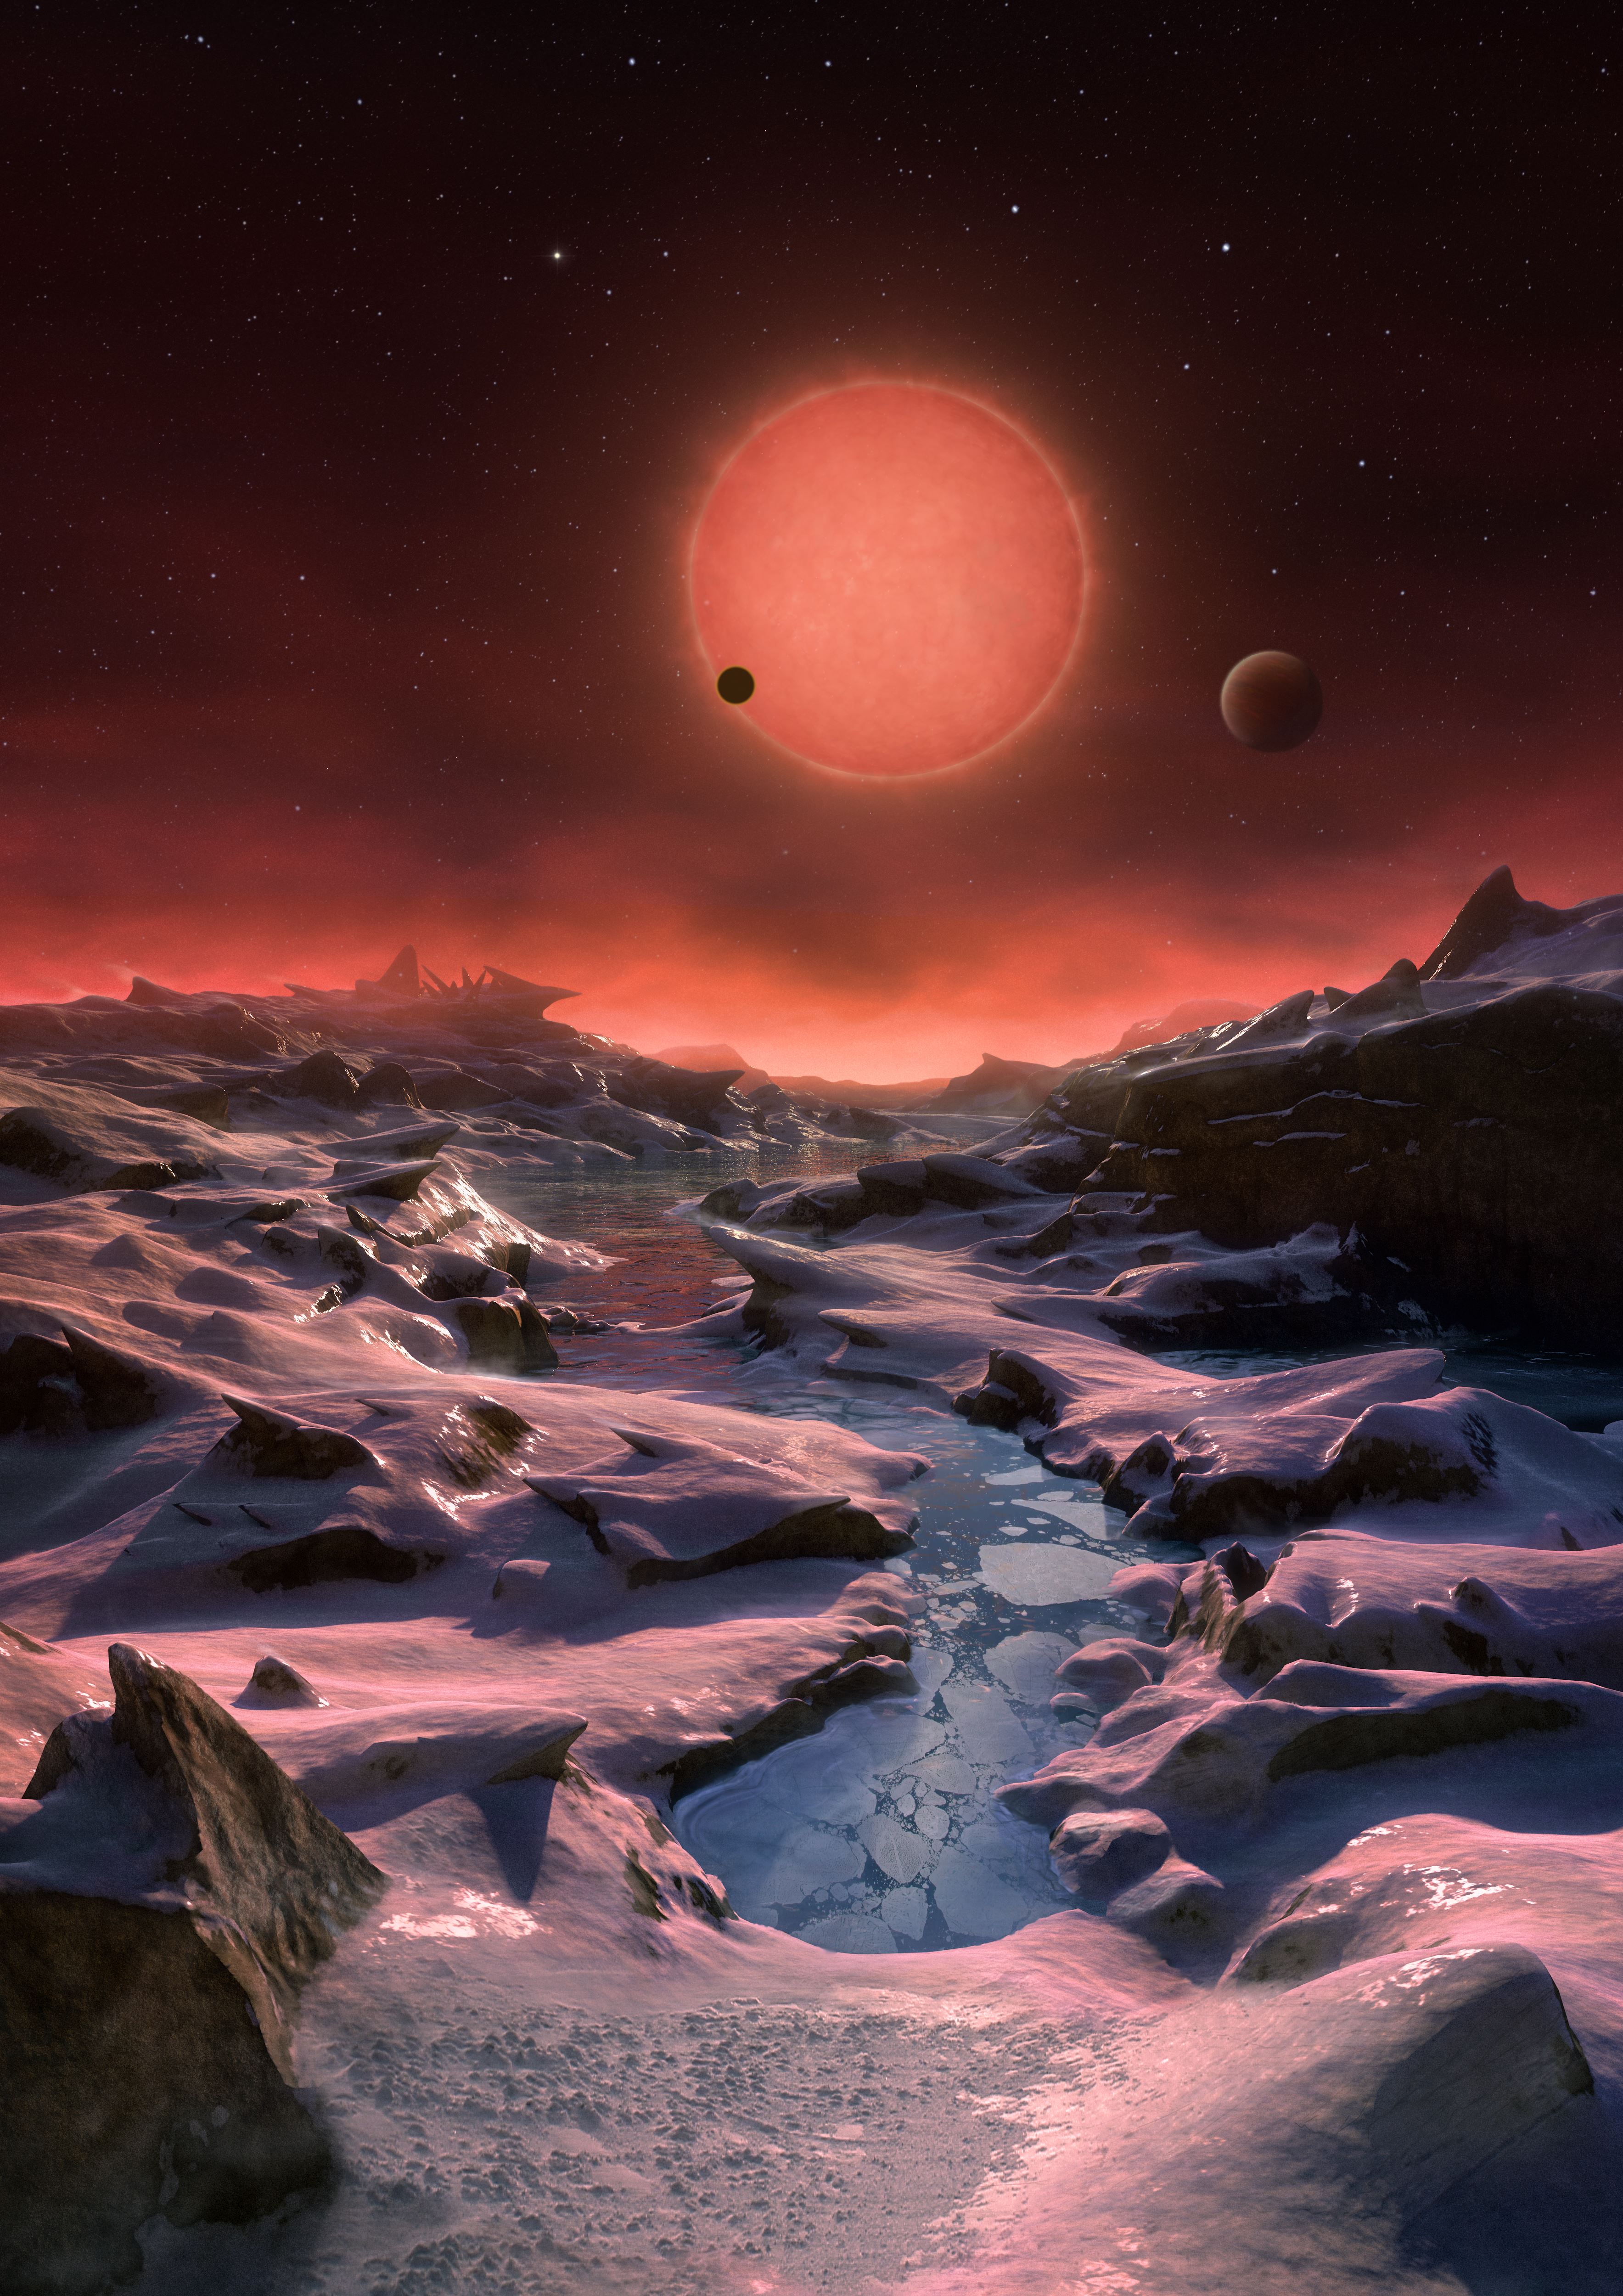 Artist's impression of another planet, covered in ice and rock with a large Sun and two moons